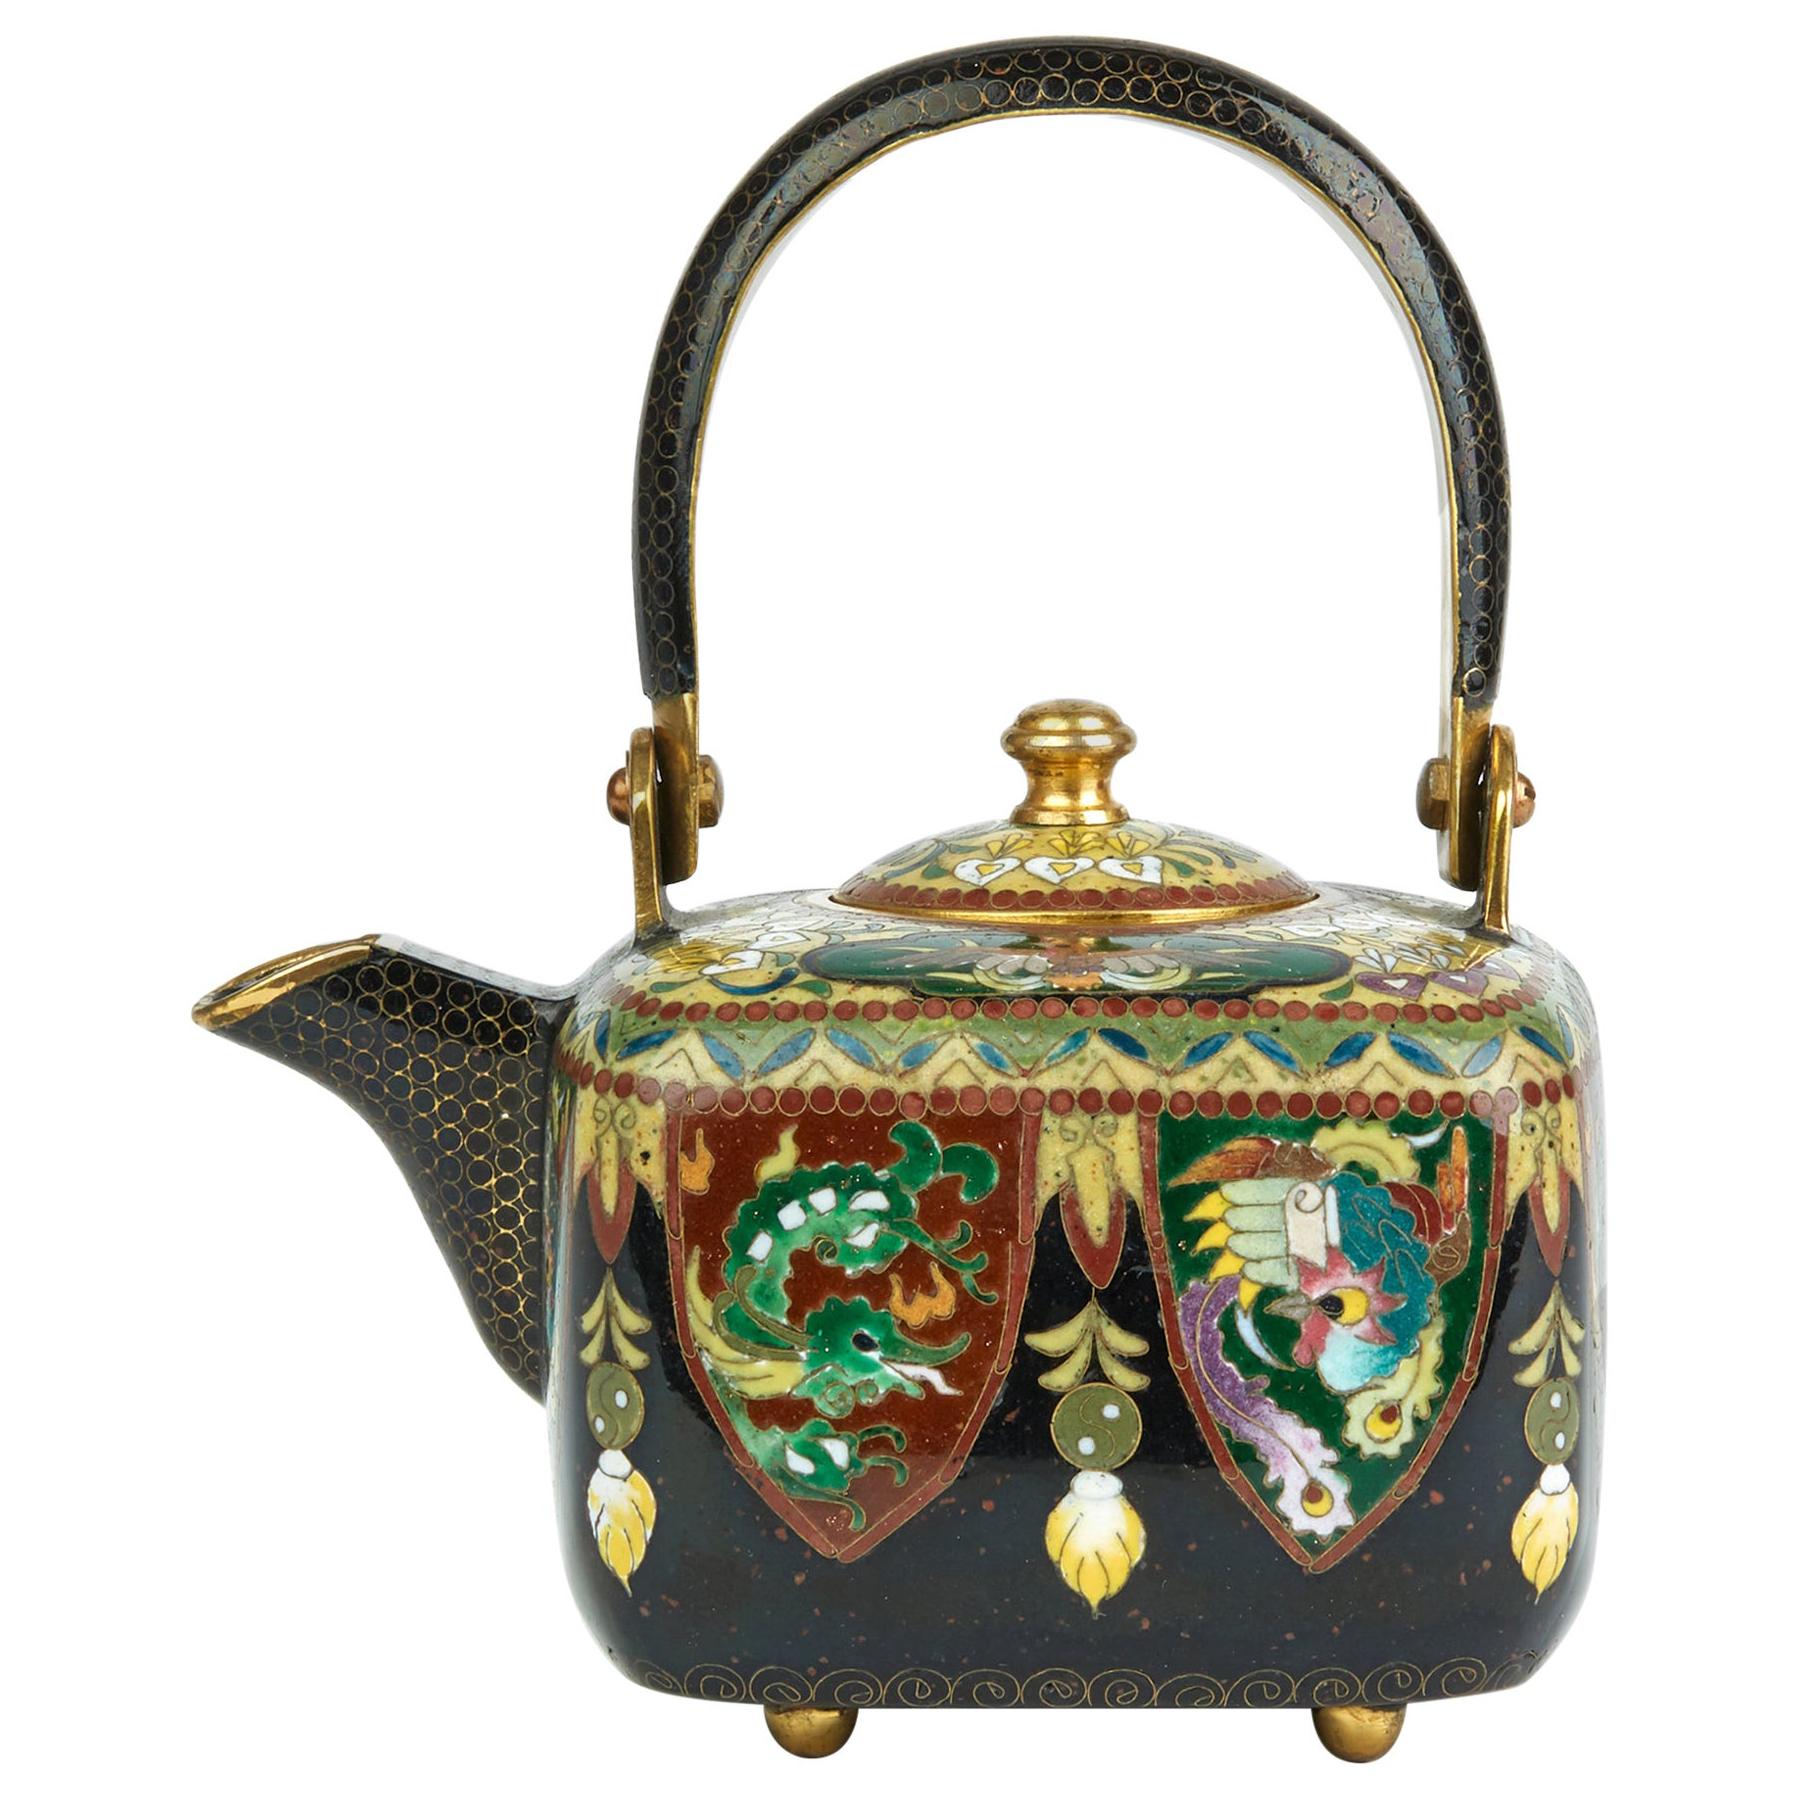 Japanese Exceptional Gilded Metal Cloisonné Teapot, Early 20th Century